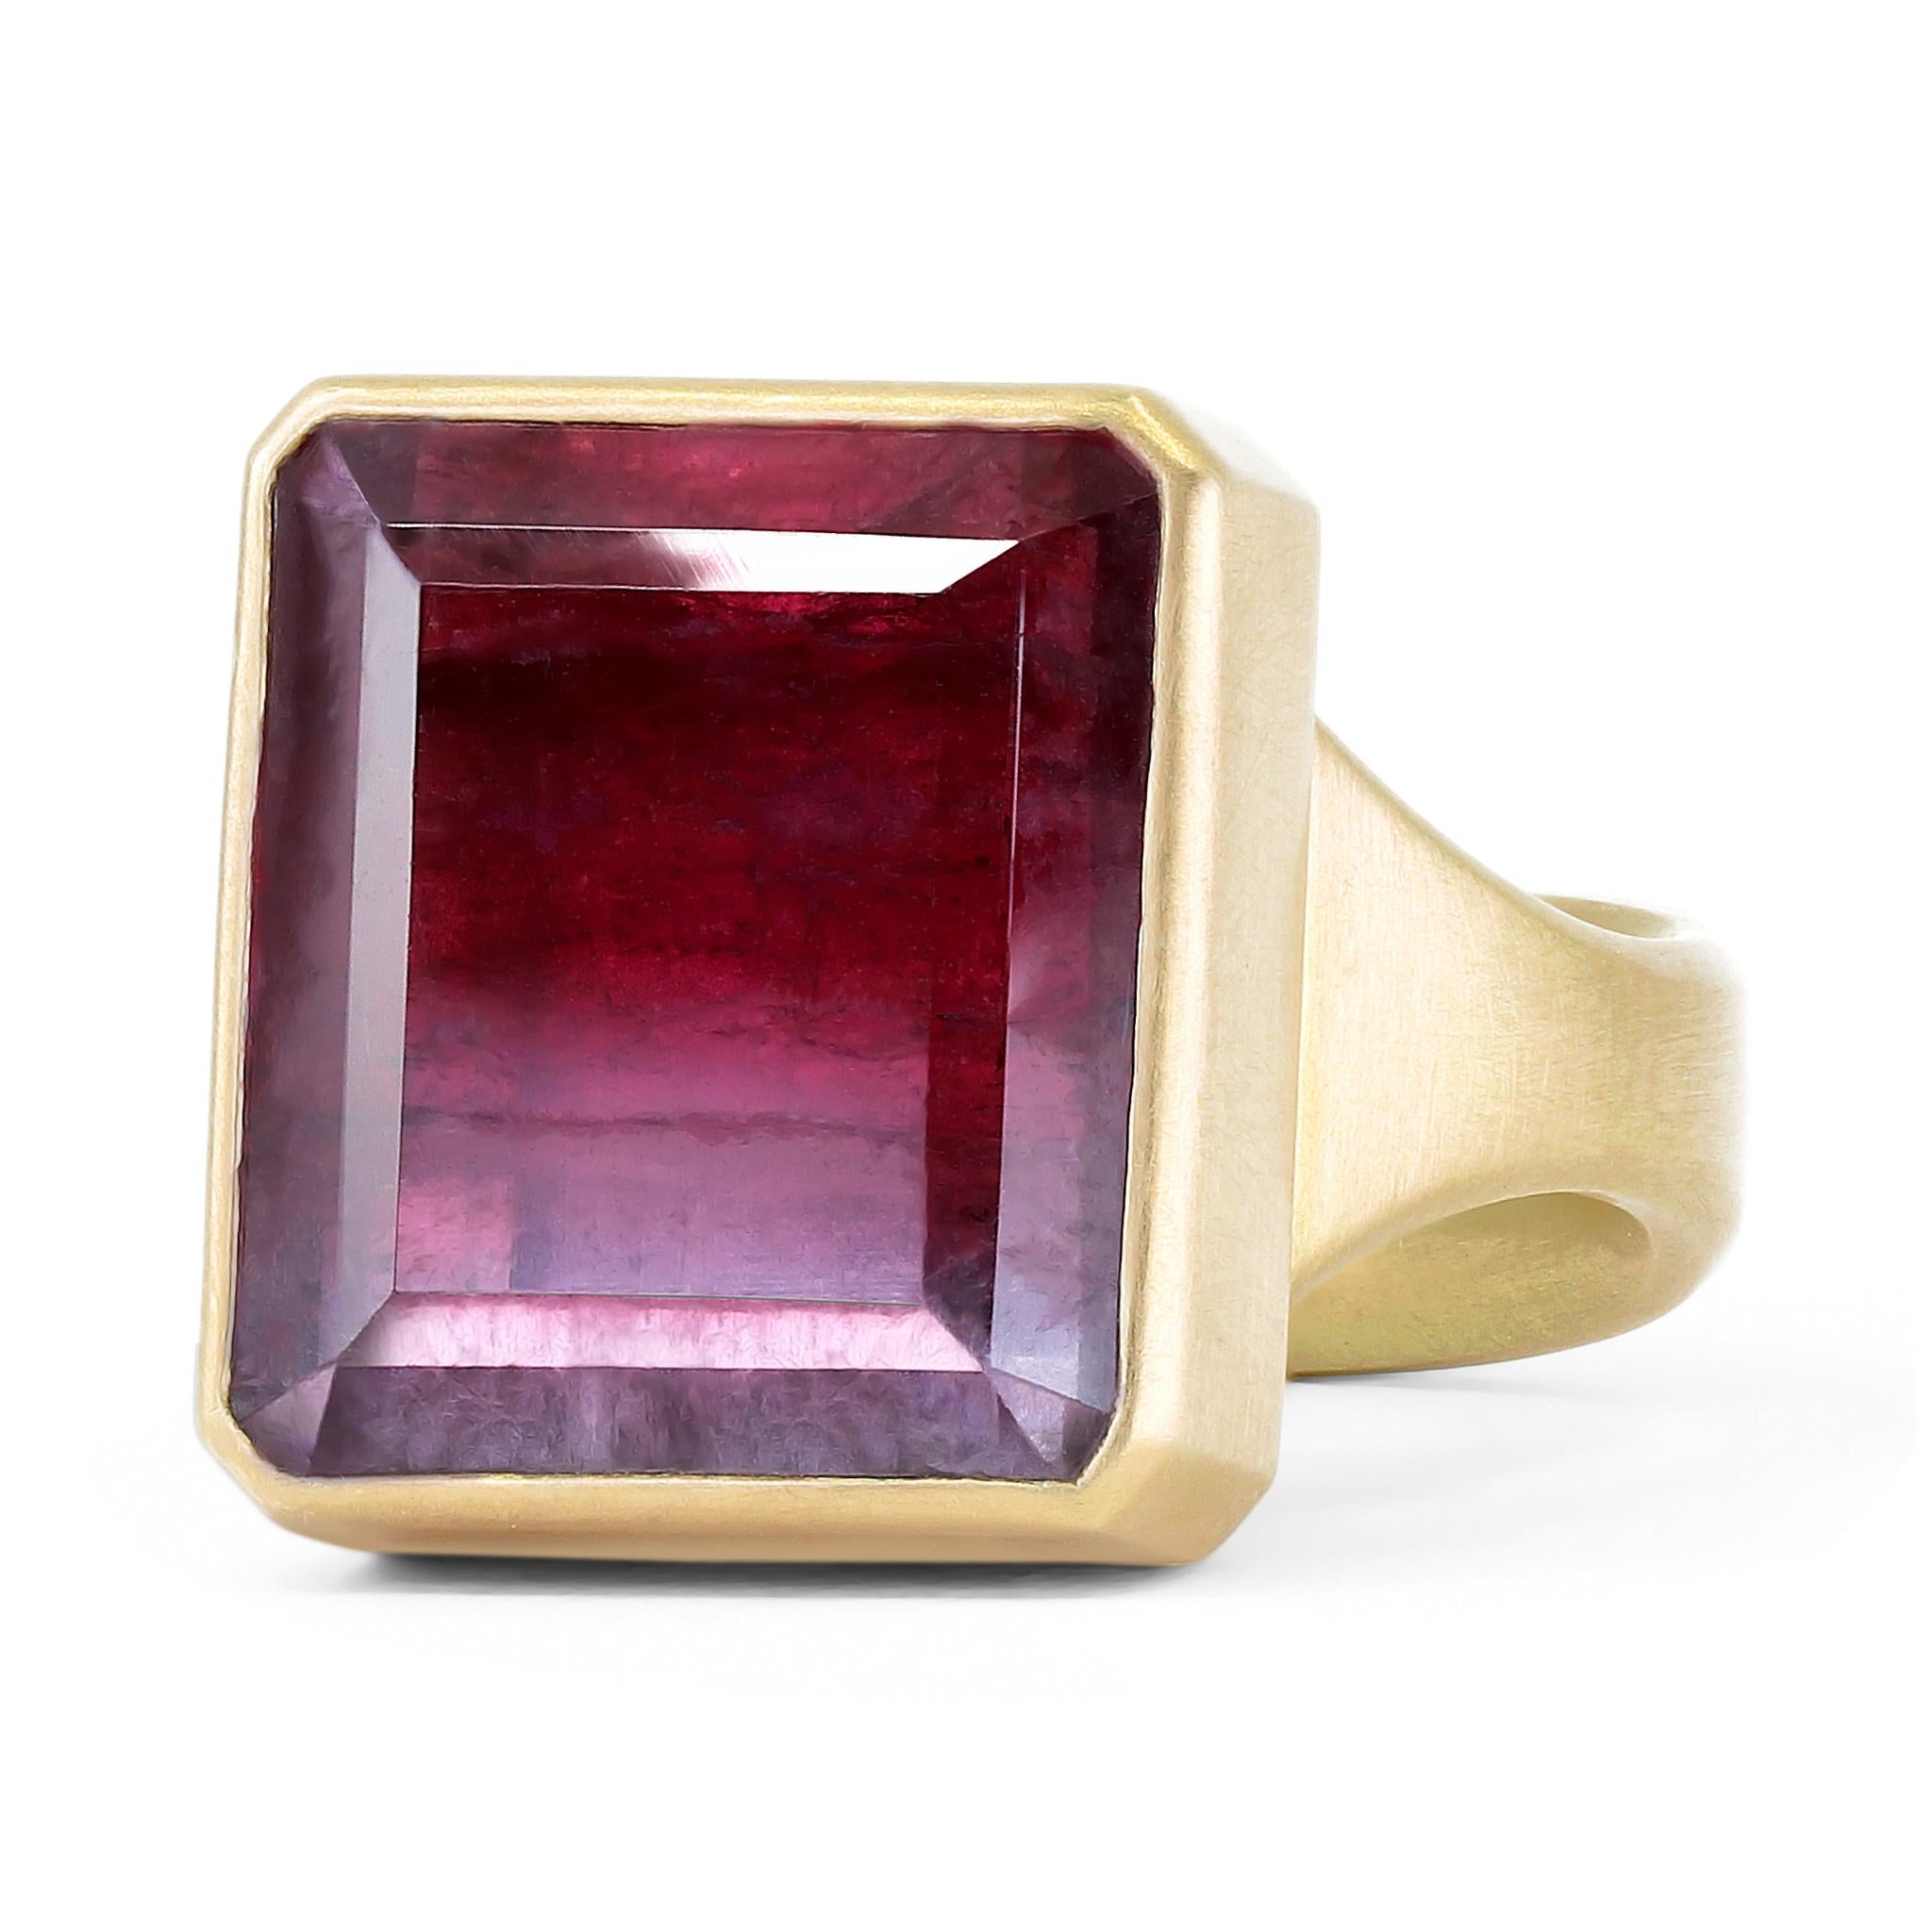 One of a kind ring hand-fabricated by acclaimed jewelry maker Lola Brooks cast in the artist's signature-finished 18k yellow gold showcasing a rare 13.98 carat red and lilac bicolor faceted rectangle tourmaline, an extraordinary natural gemstone.